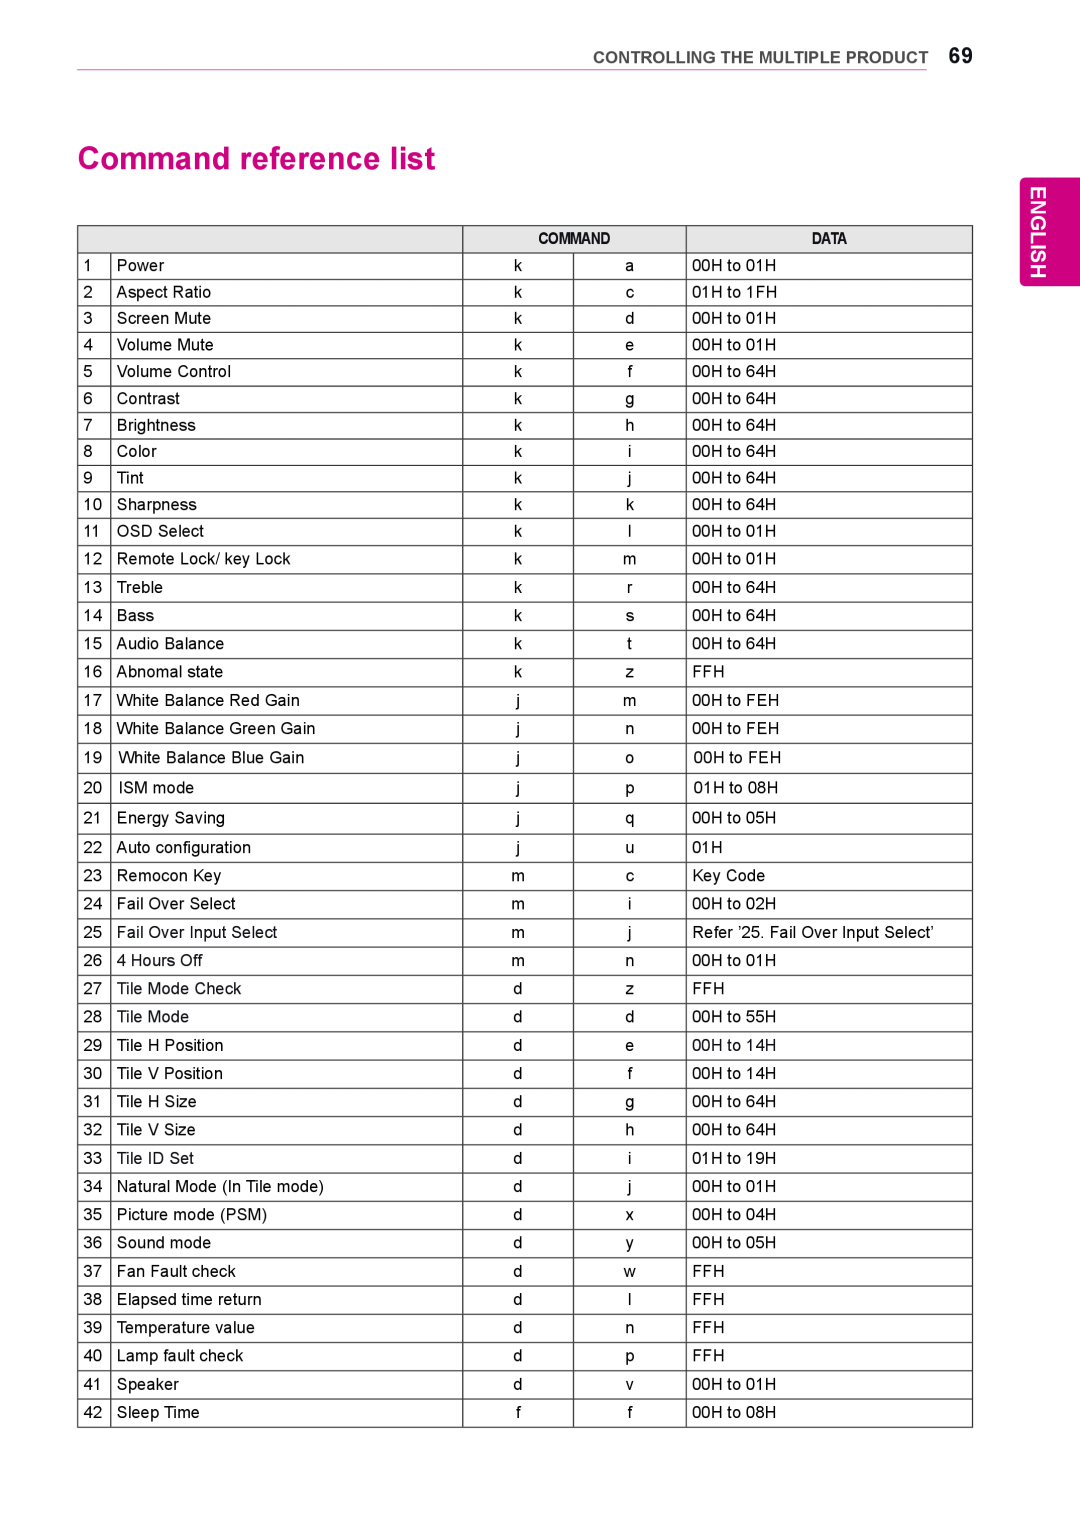 LG Electronics 42WS10, 47WS10, 55WS10 owner manual Command reference list, English, Controlling The Multiple Product 